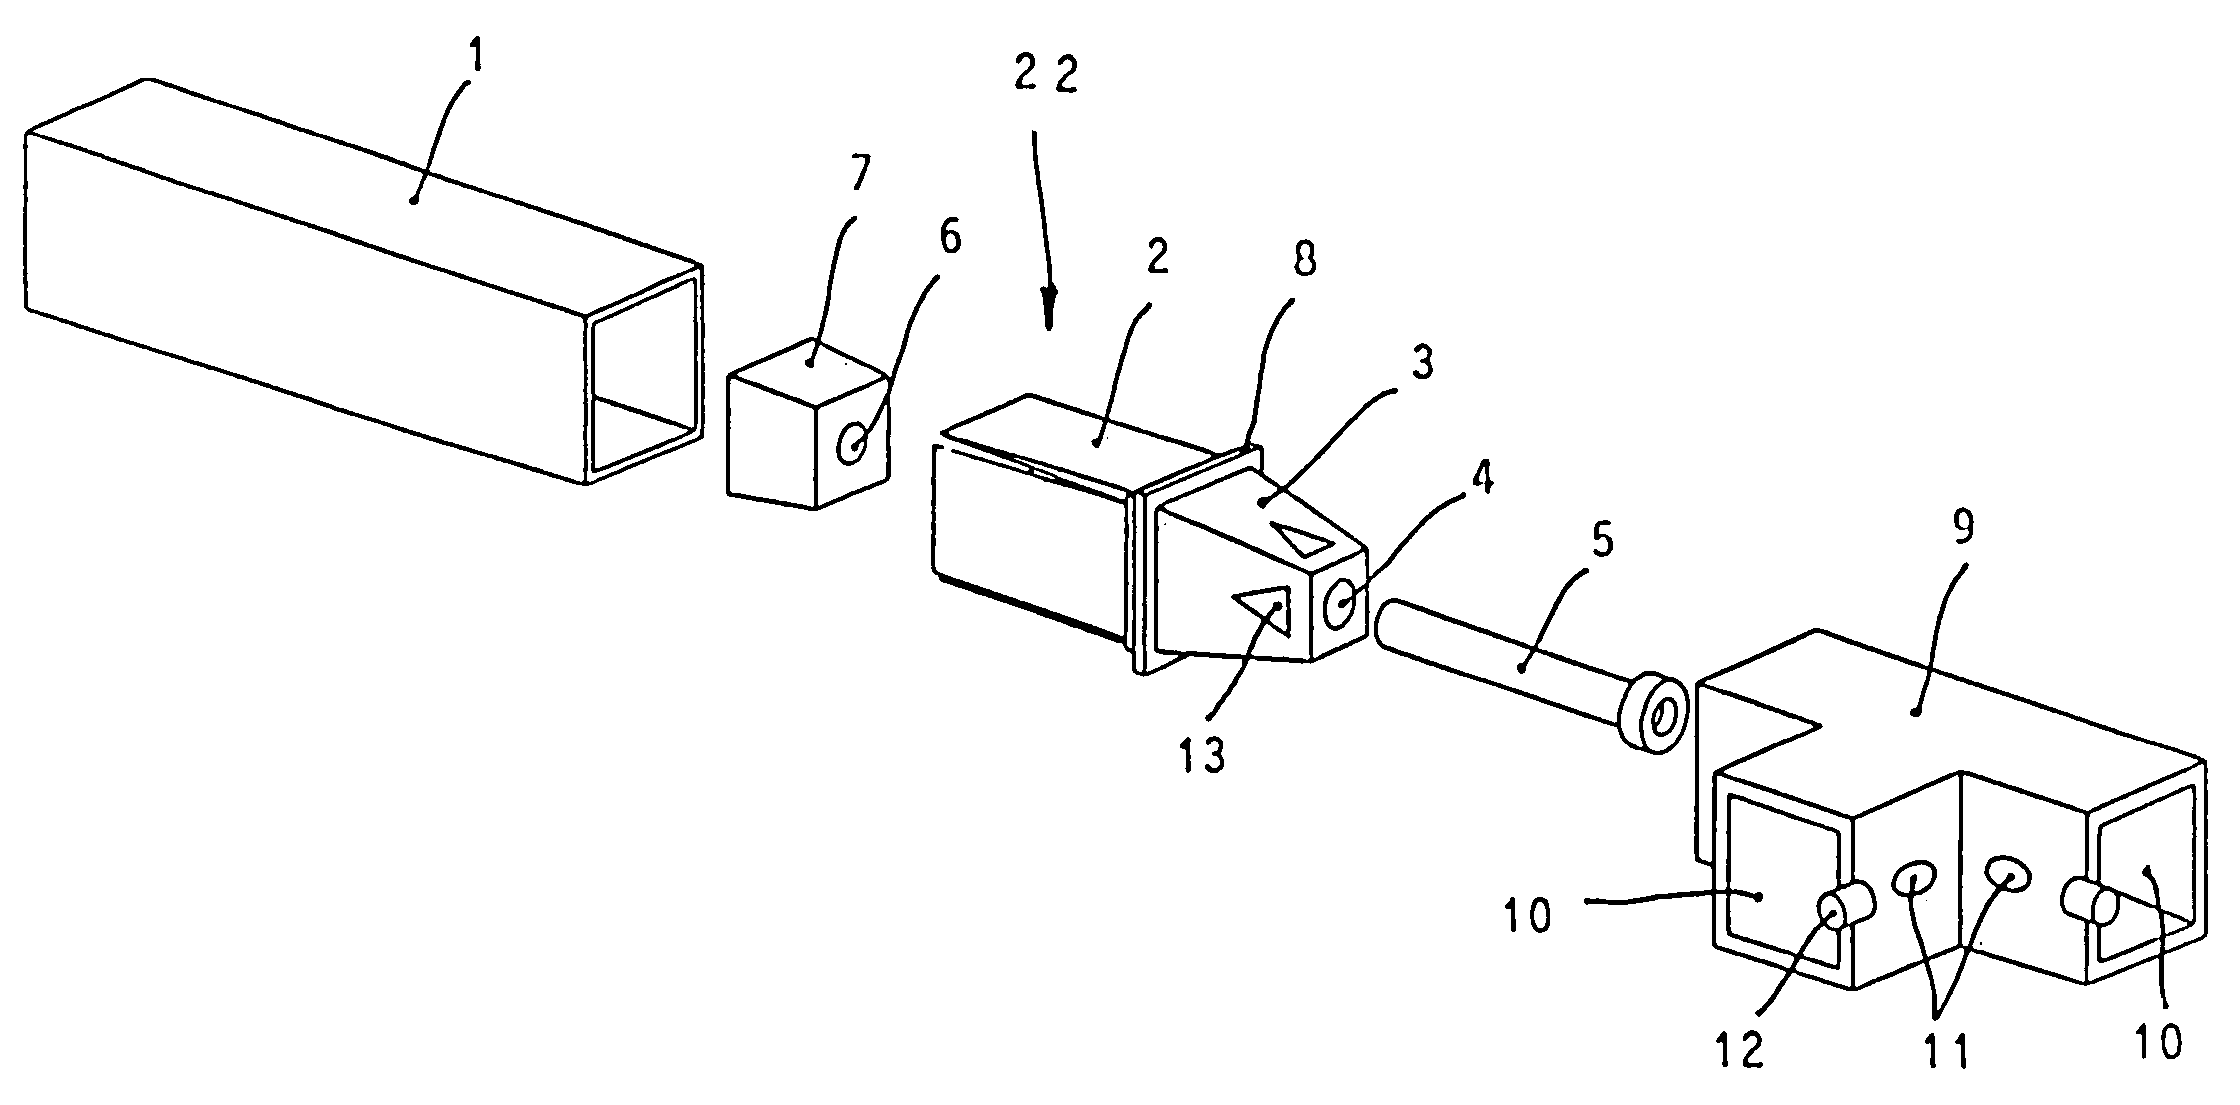 Connecting device for tubular elements